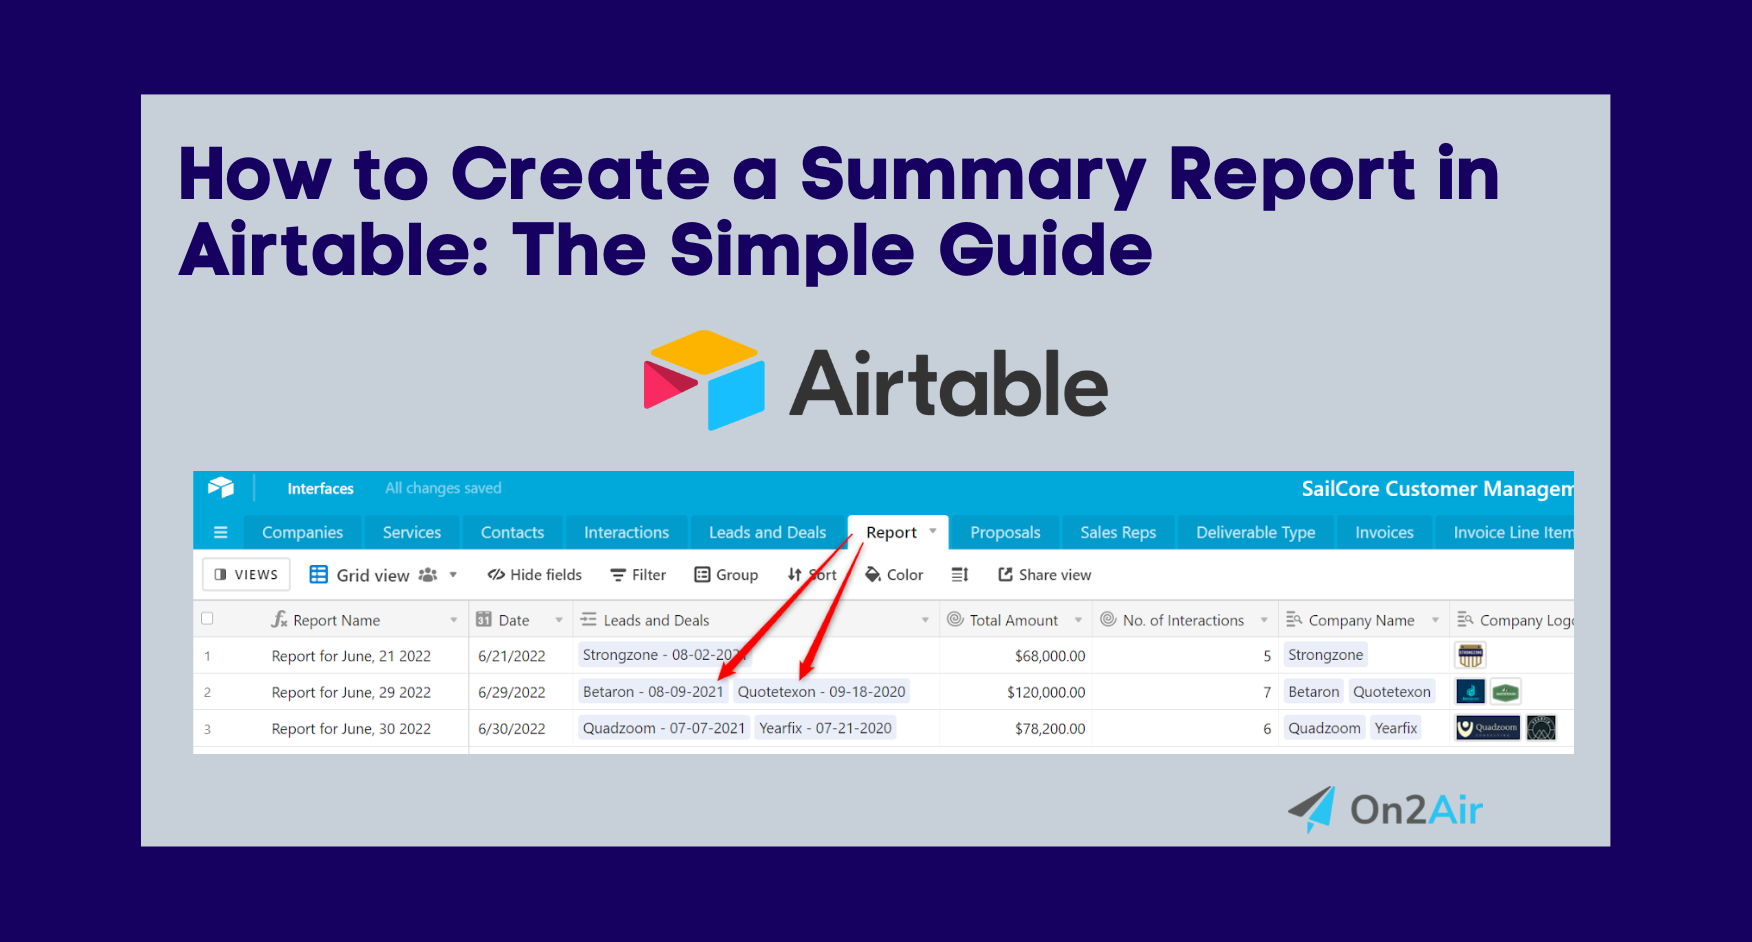 How to Create a Summary Report in Airtable: The Simple Guide